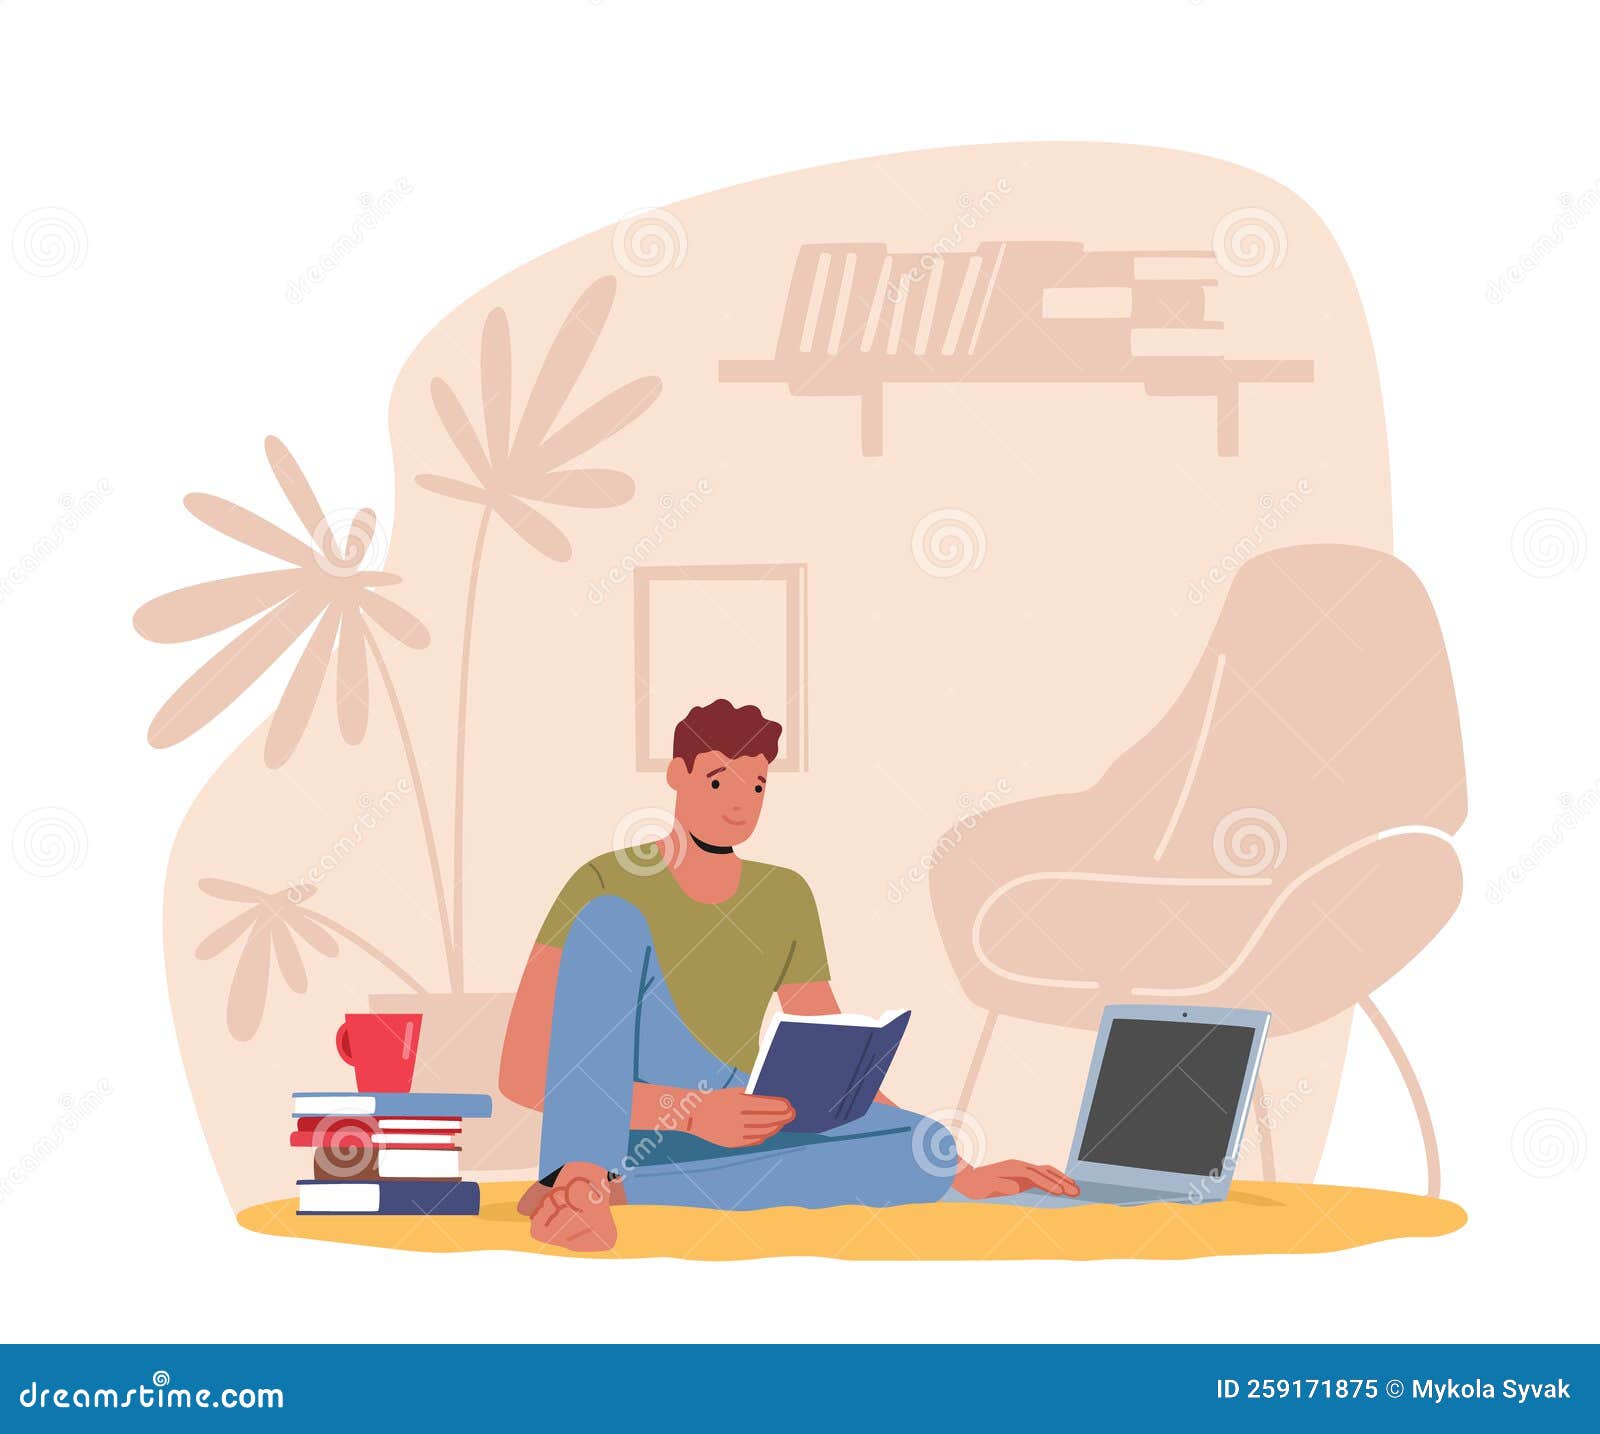 remote freelance work, homeworking place concept. man freelancer sit on floor with coffee cup and pile of books